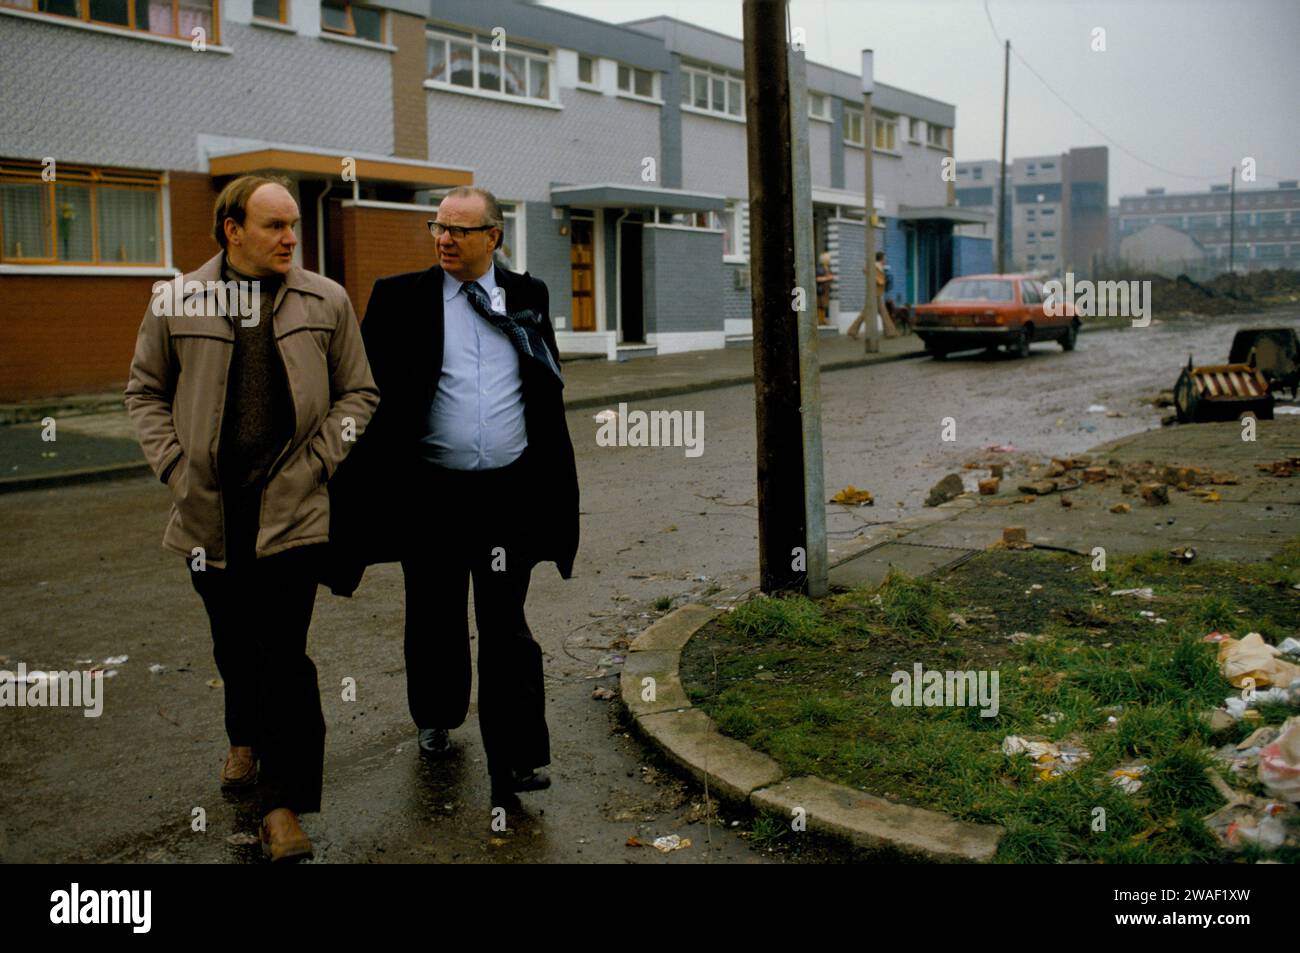 Gerry Fitt MP, leaving meeting with constituents  at Unity Flats in Belfast. Here with Alec Douglas his bodyguard. Sir Gerry Fitt founder of the SDLP and MP for West Belfast Northern Ireland. 1980 1980S UK HOMER SYKES Stock Photo